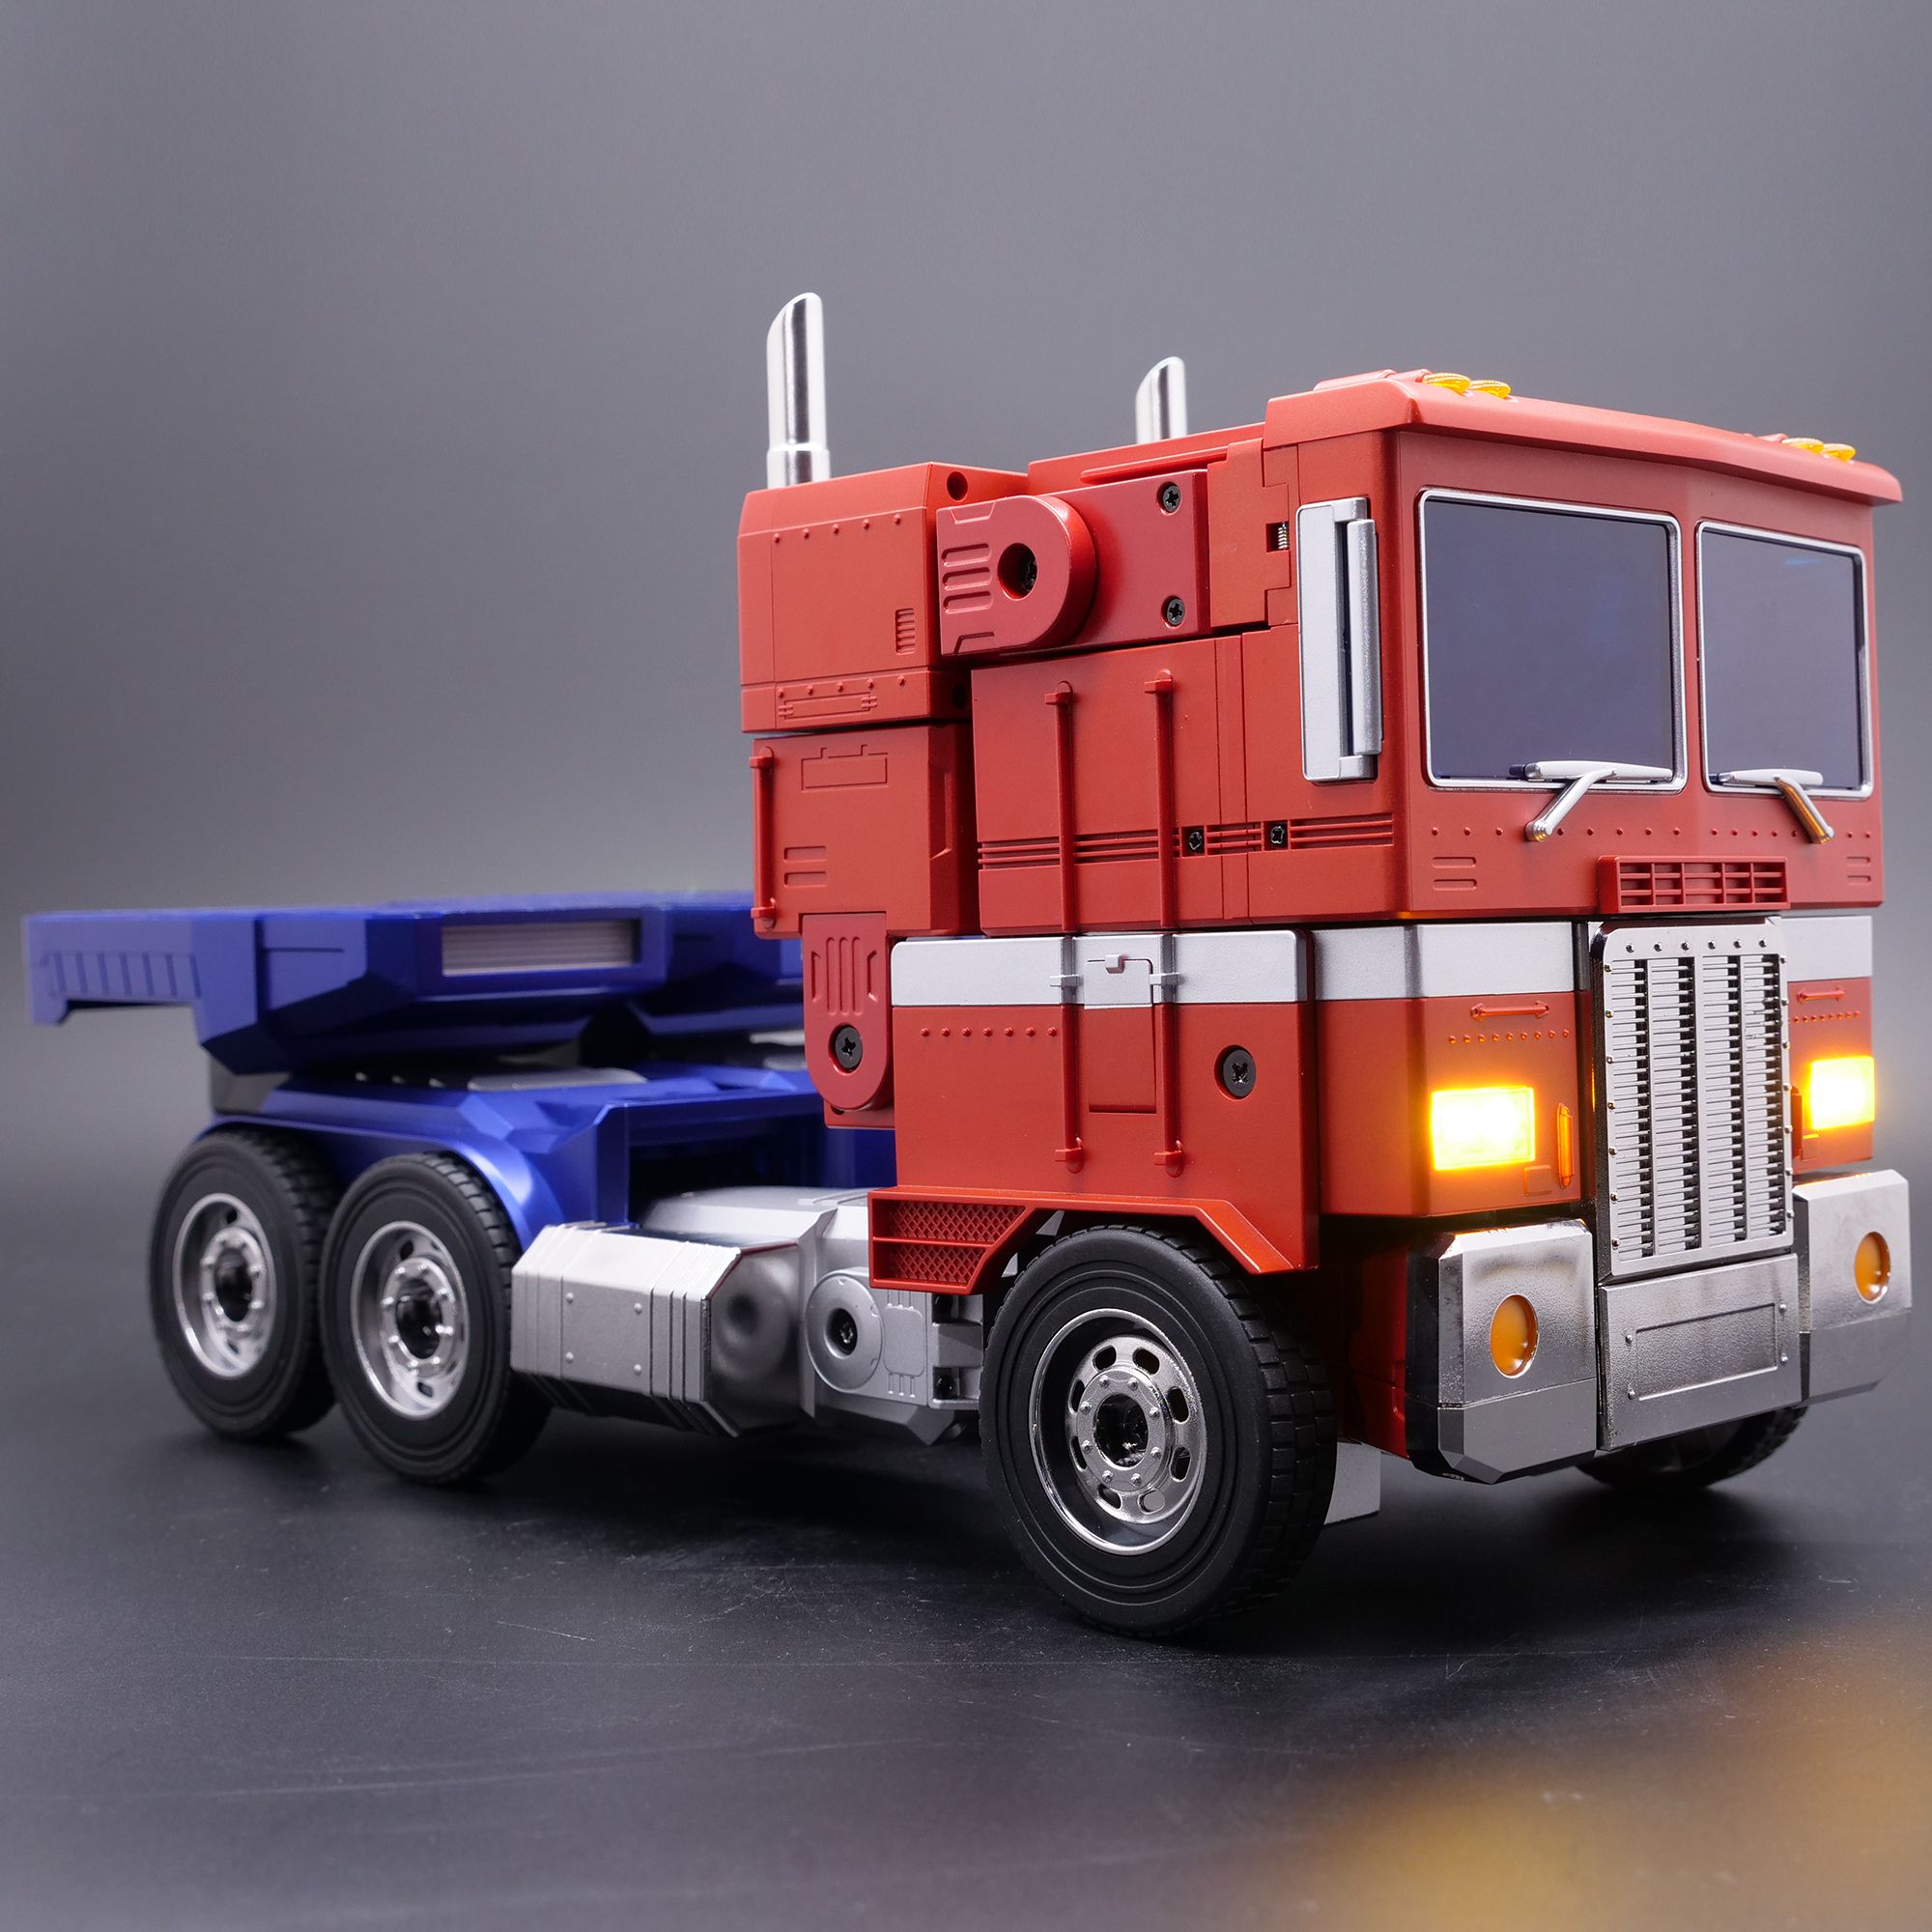 Hasbro's Transformers Optimus Prime toy in Truck Mode.